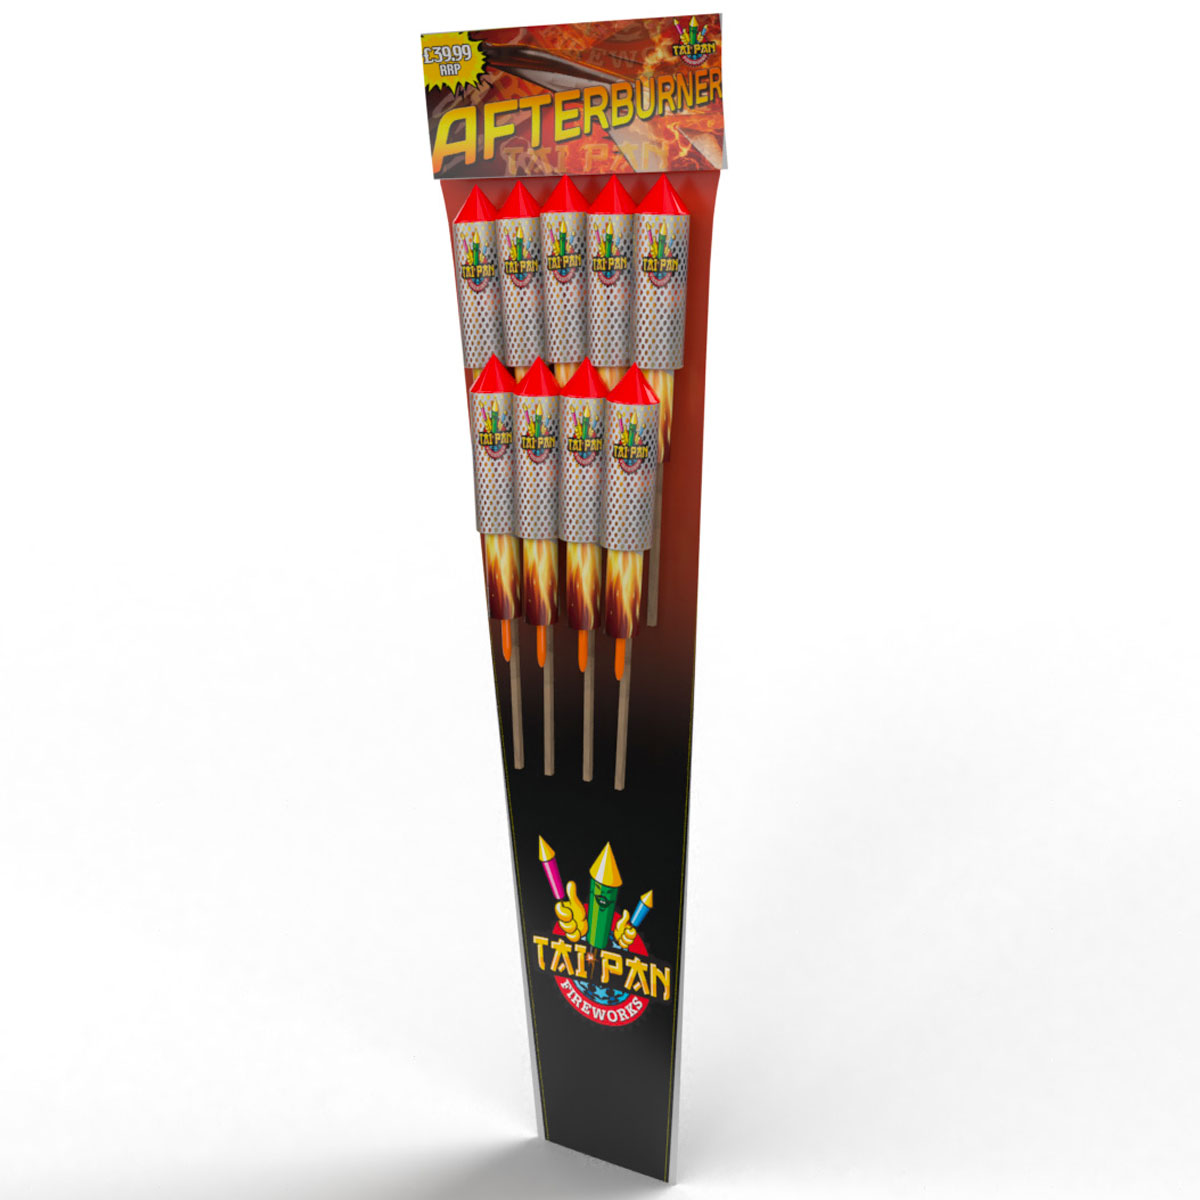 afterburner rockets by tai pan fireworks, available at Paul's Fireworks